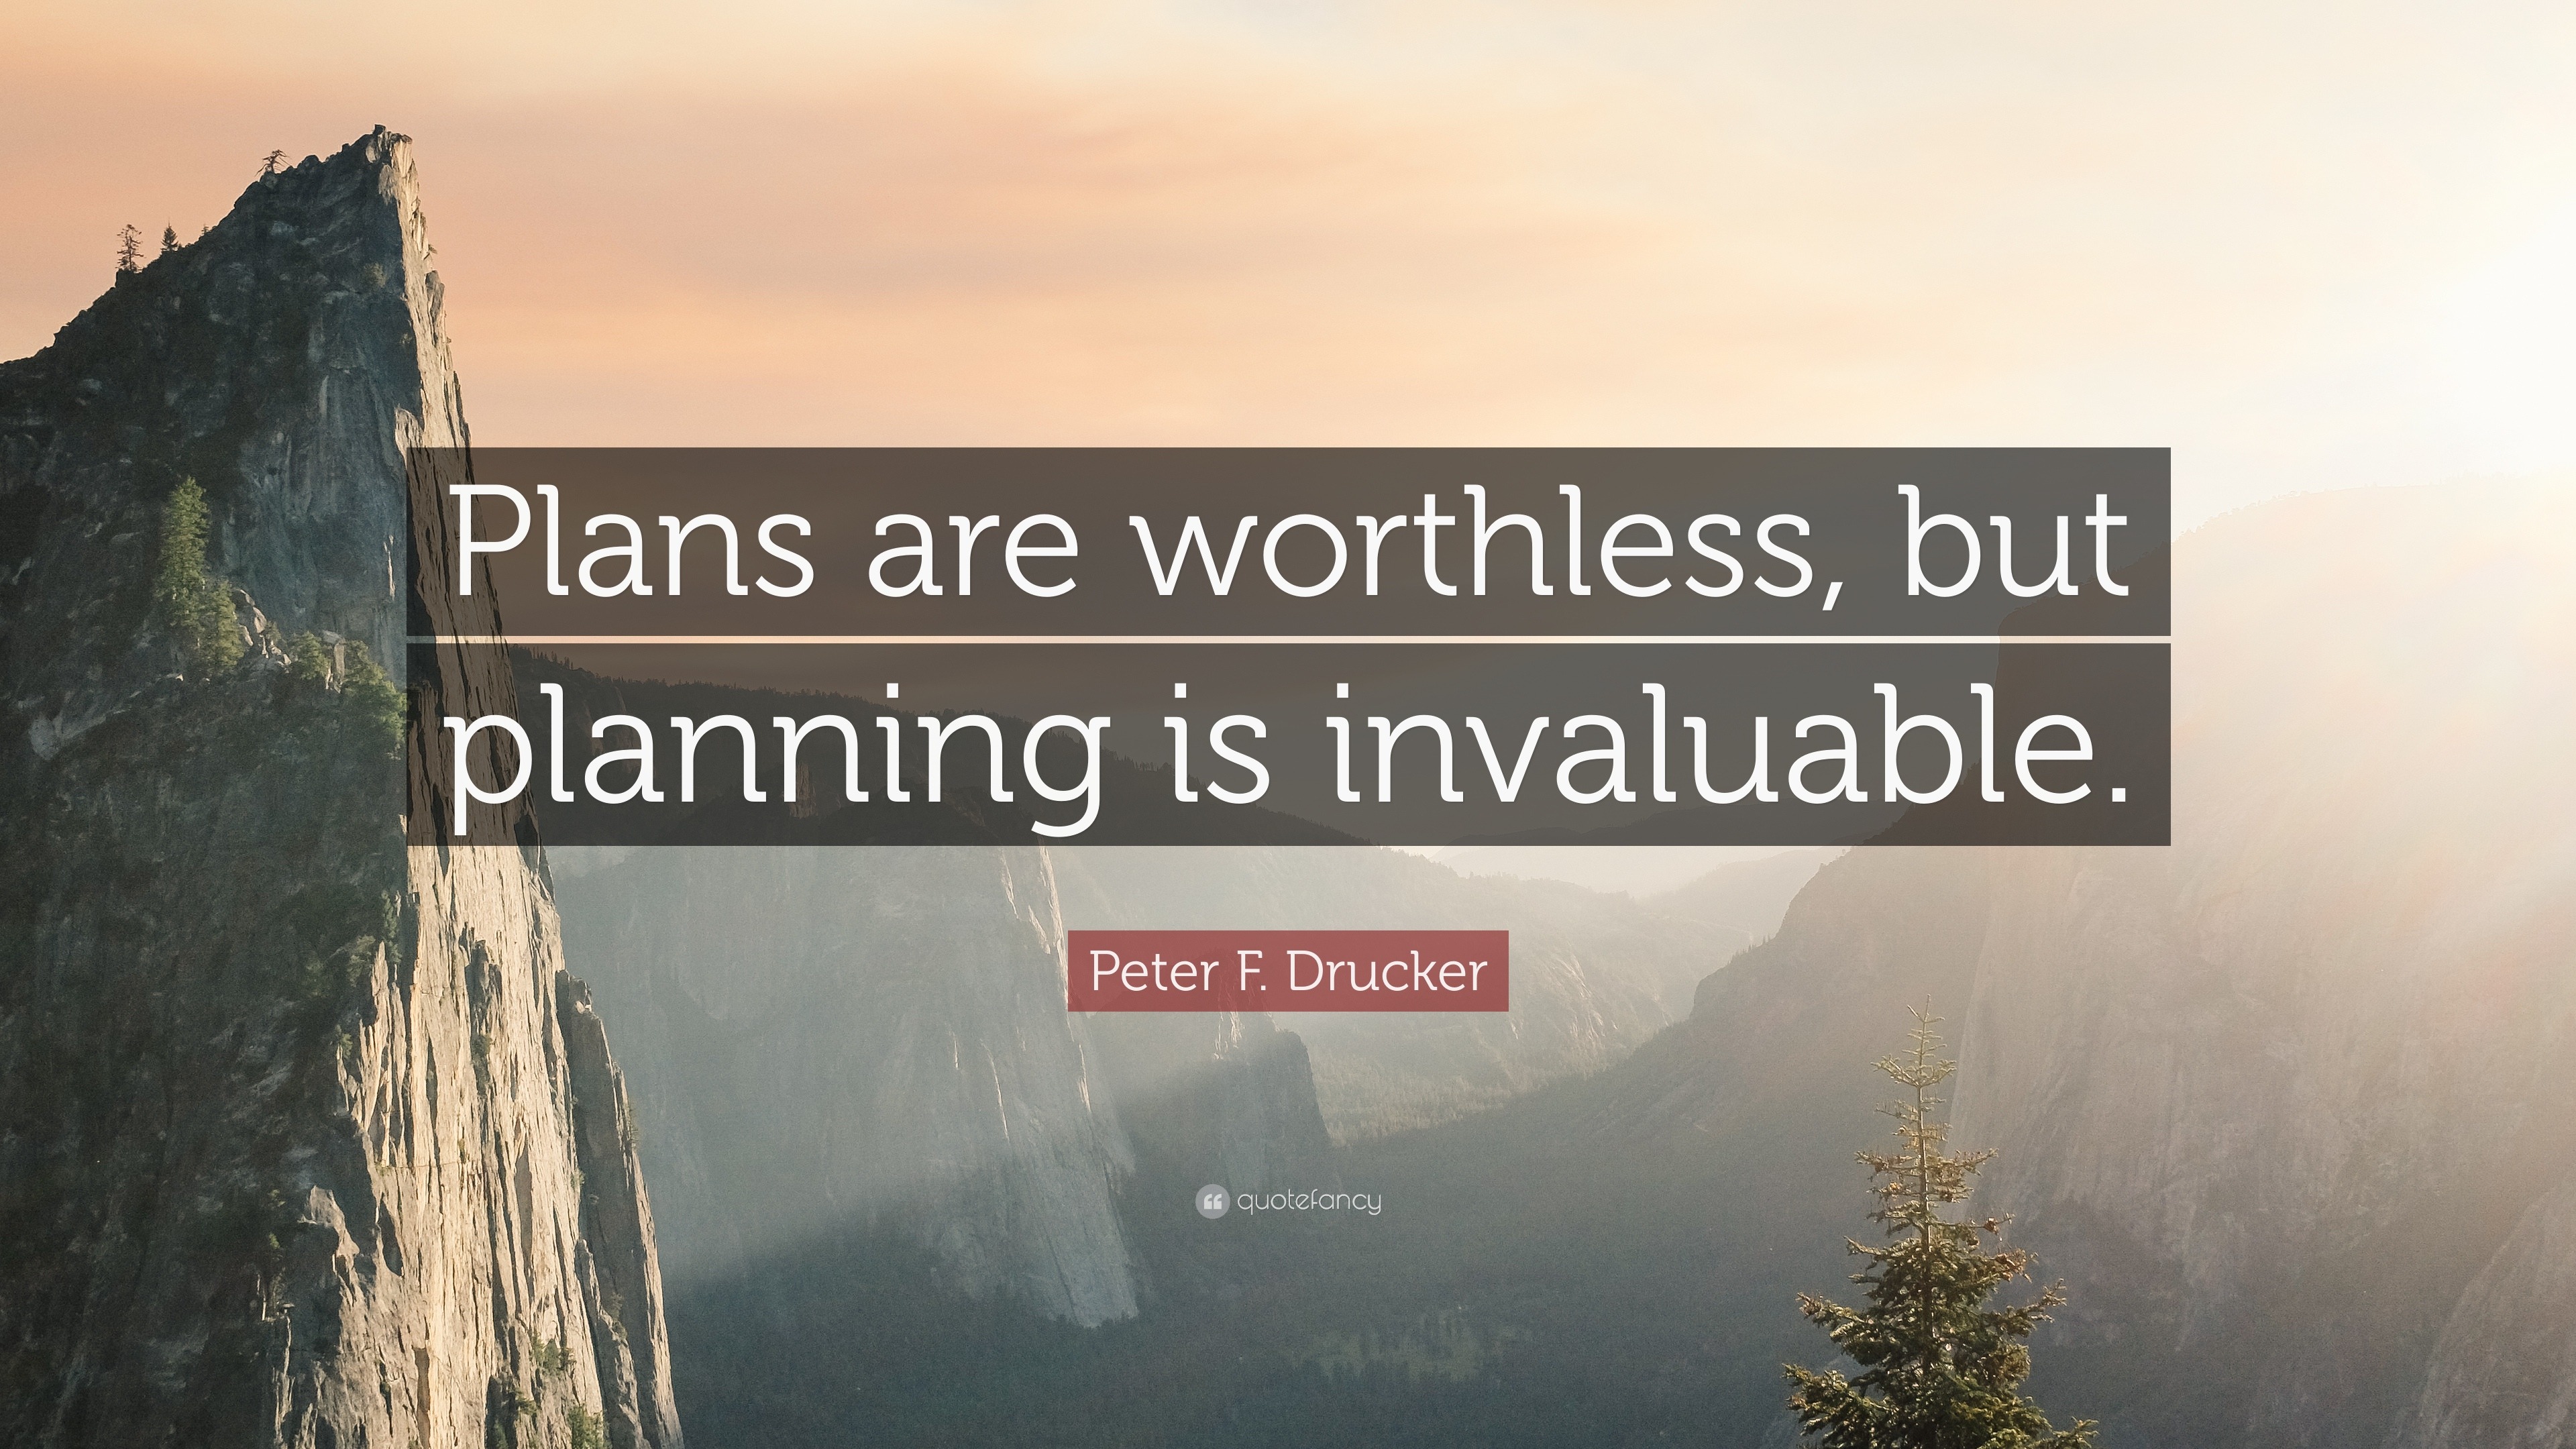 Peter F. Drucker Quote “Plans are worthless, but planning